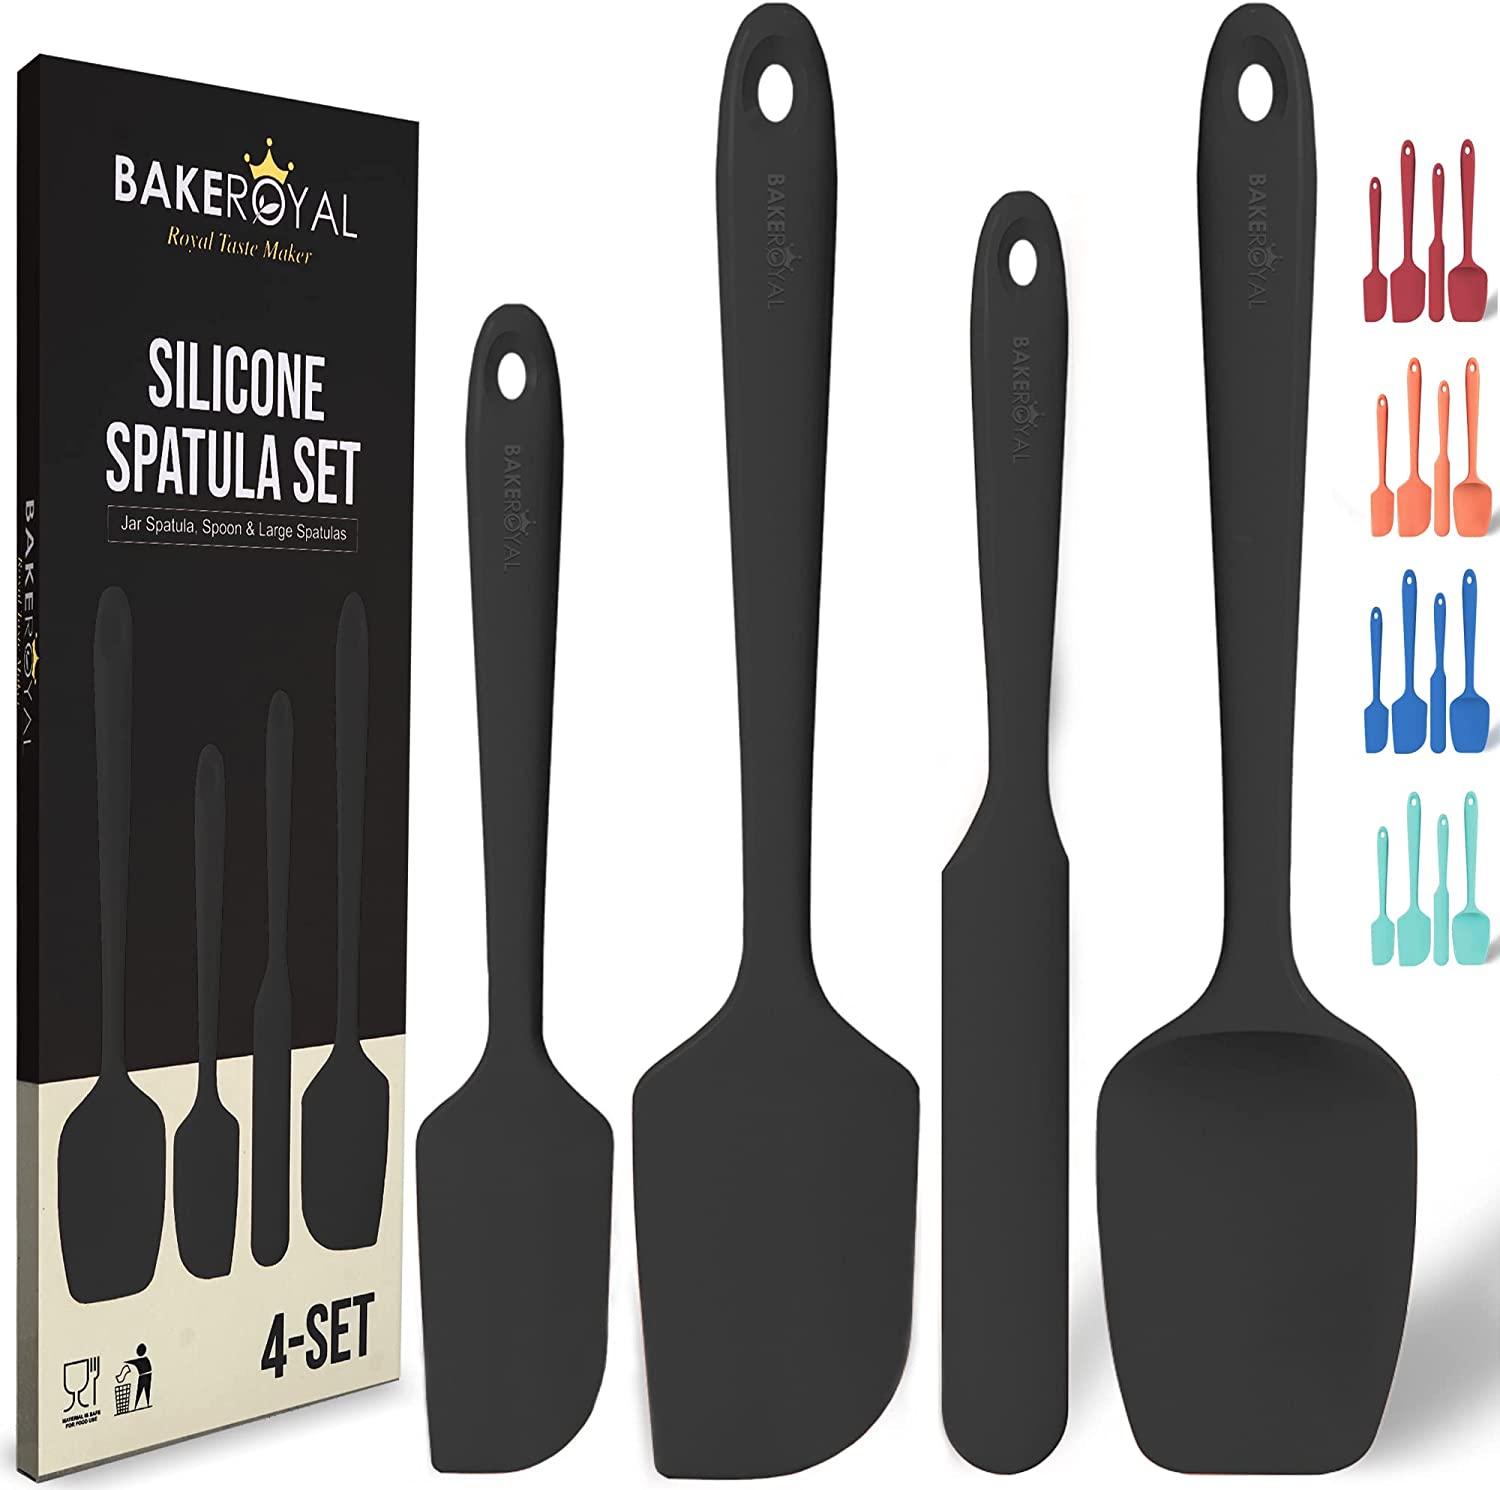 BakeRoyal Silicone Spatula Set - 4-Piece Rubber Spatulas Silicone Heat Resistant 600xc2xb0F for Everyday Task - Seamless Design Kitchen Spatulas for Nonstick Cookware - Silicone Kitchen Utensils Sets -  - 